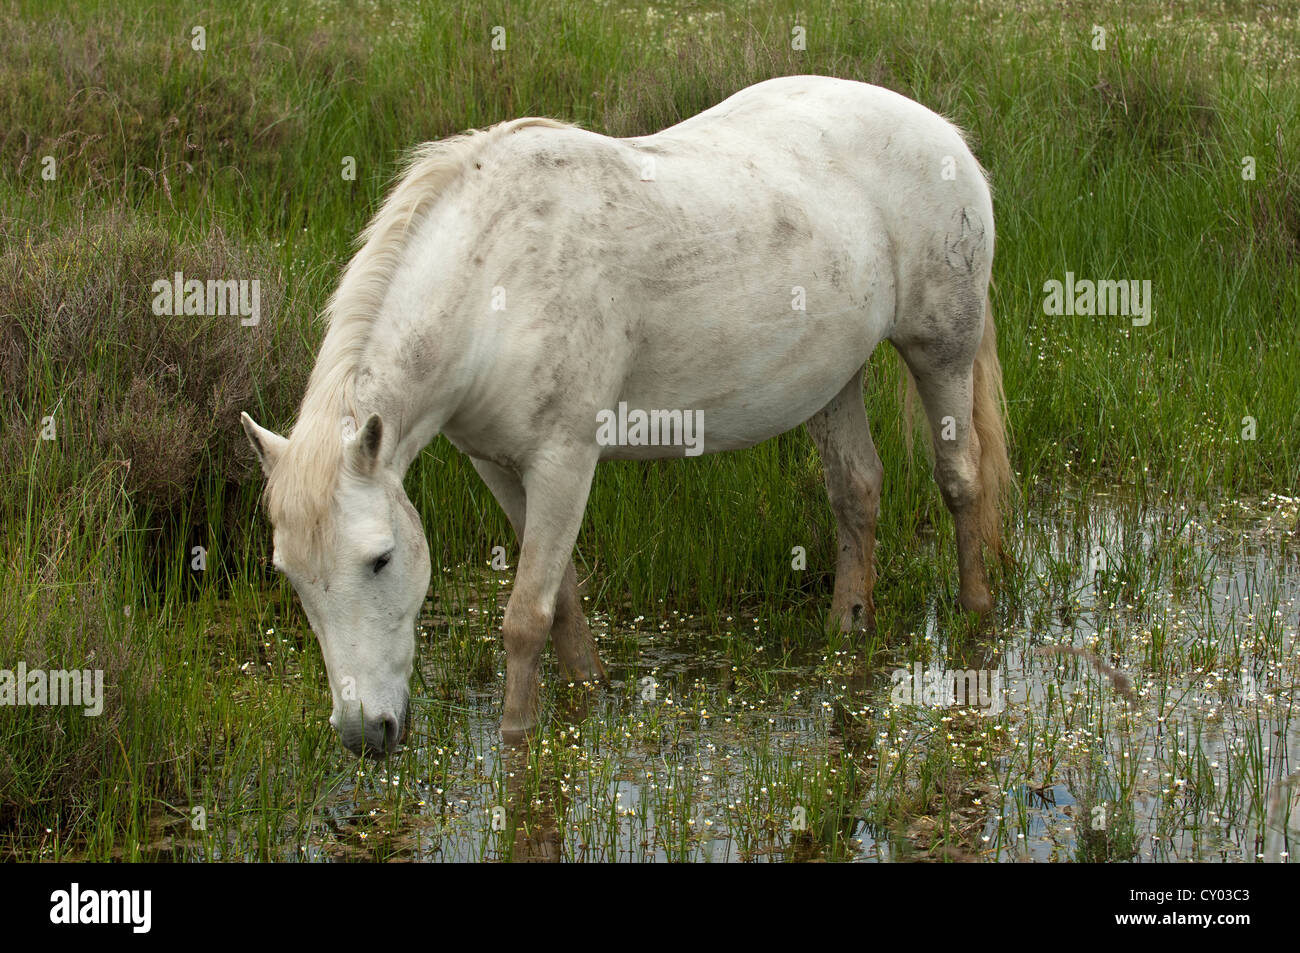 Camargue horse in a wetland area, Camargue, France, Europe Stock Photo